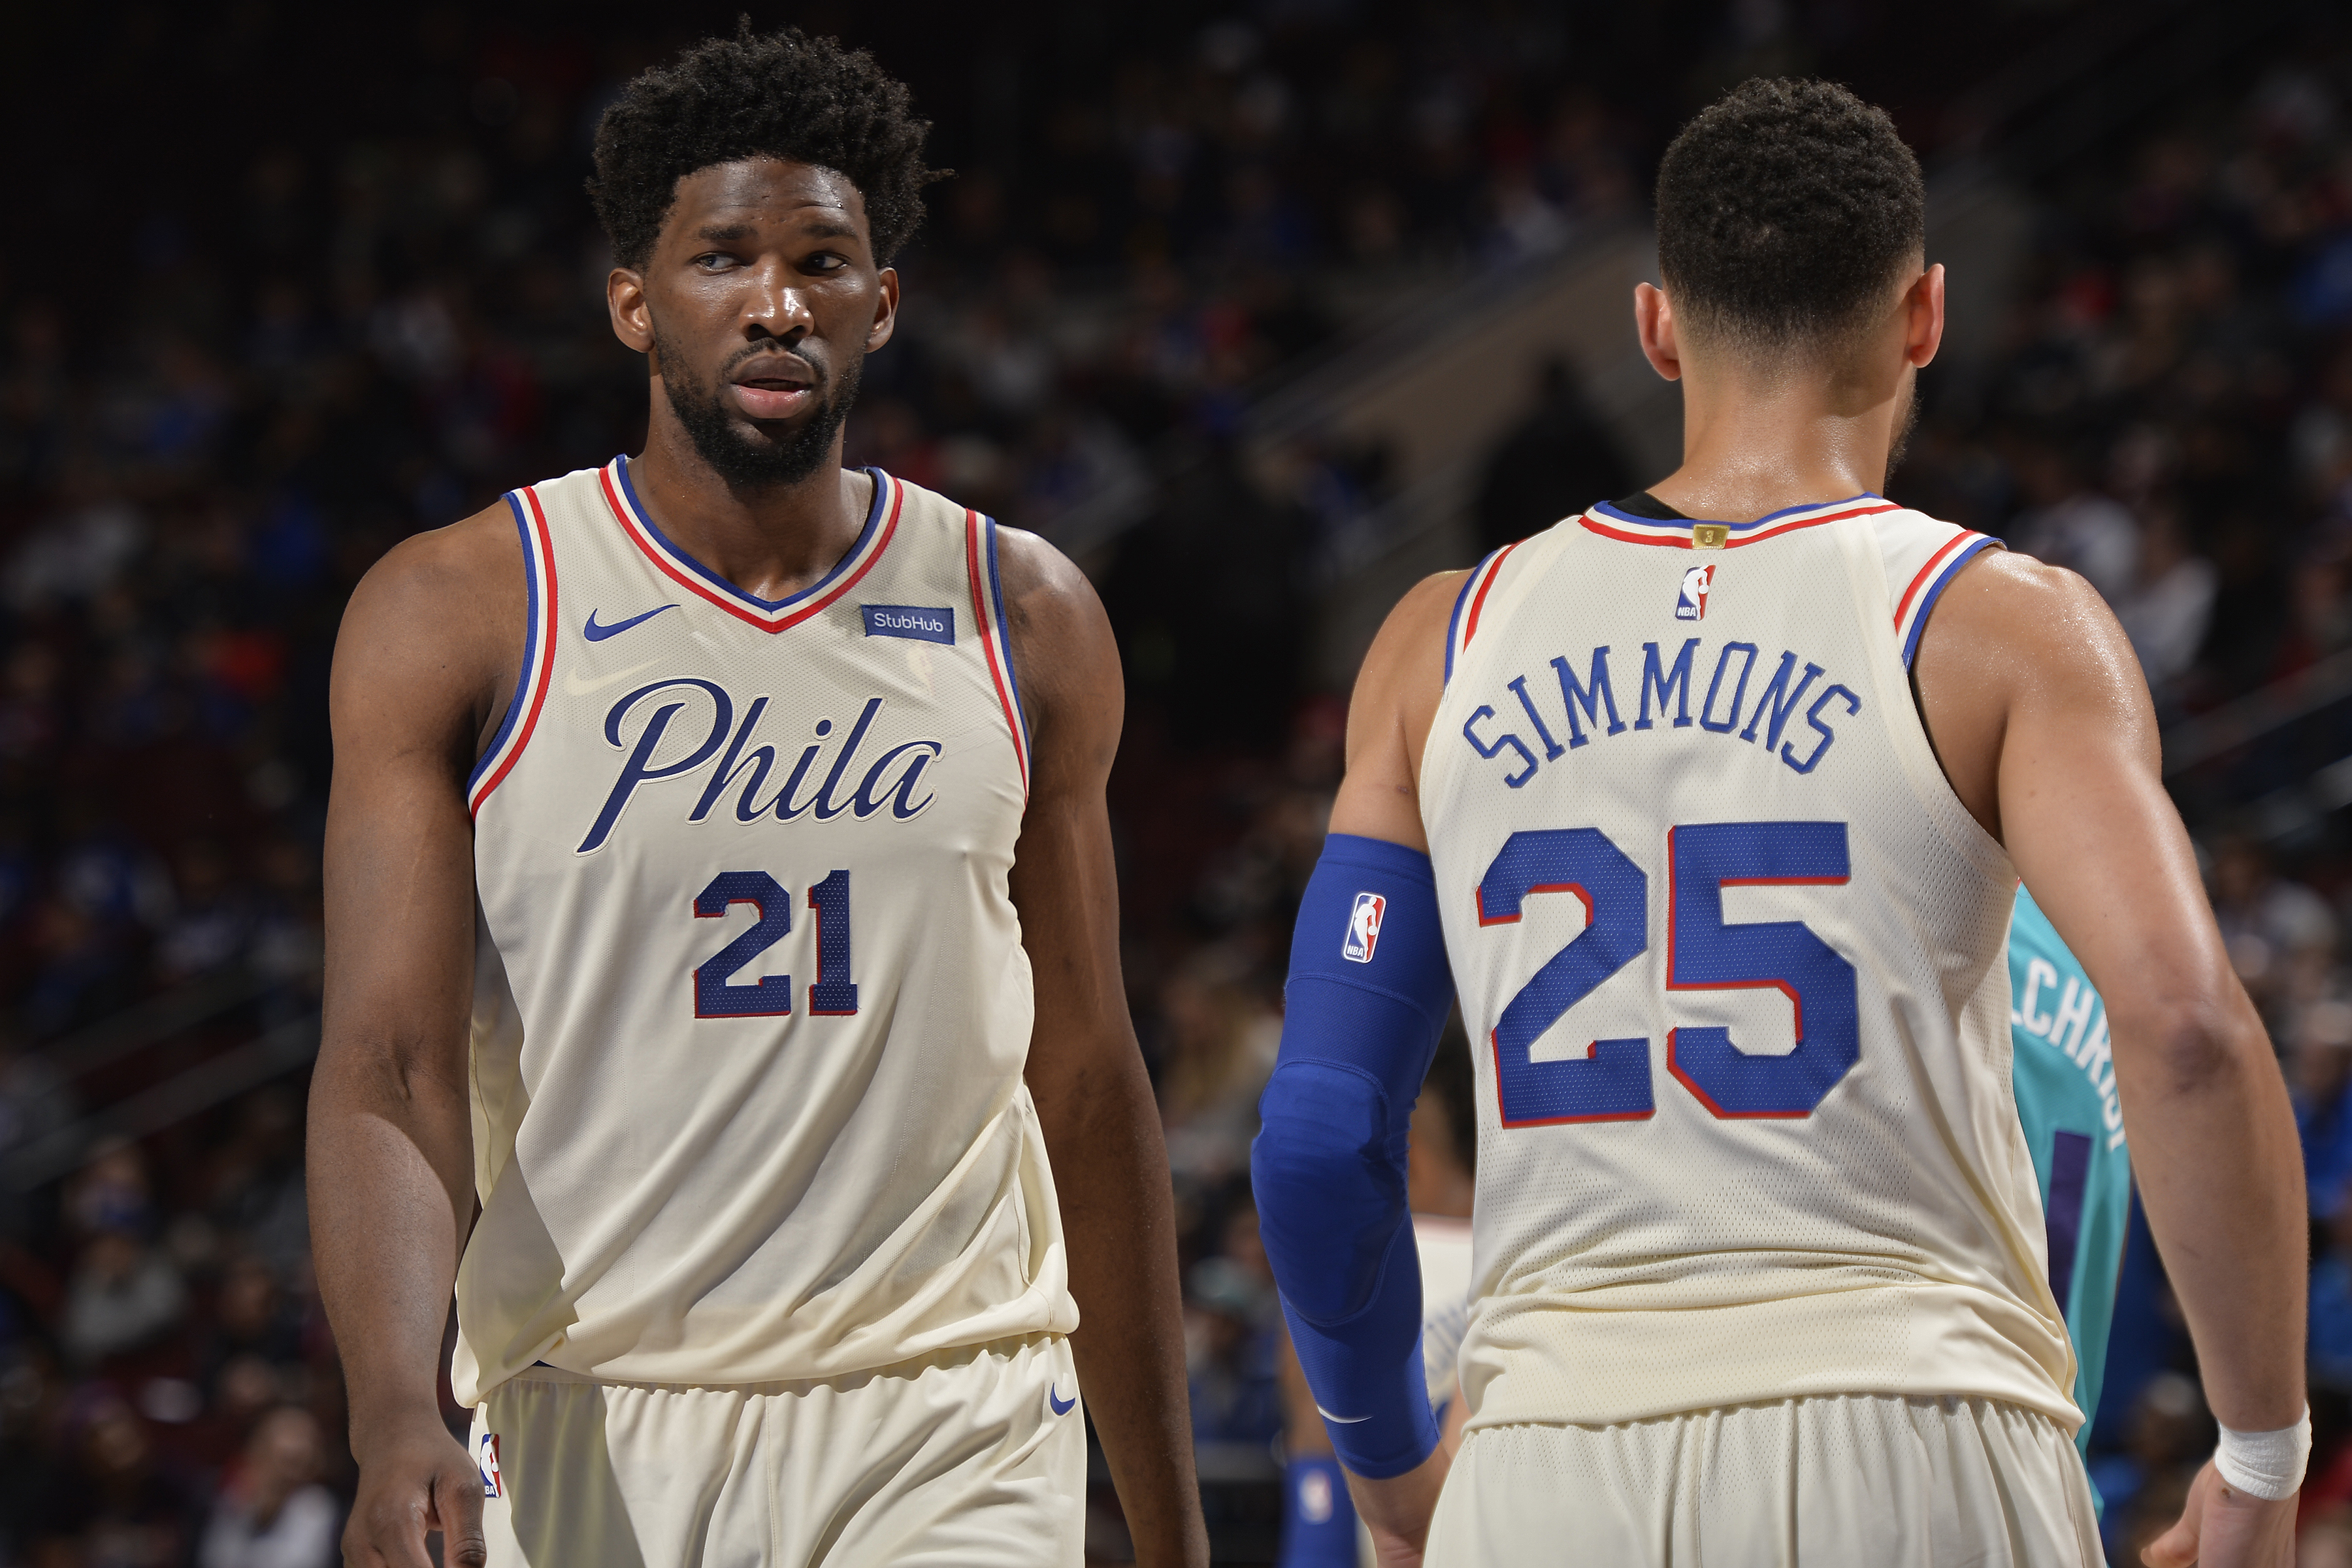 Our Boy Ben Simmons Is Opening The 2018-19 NBA Season